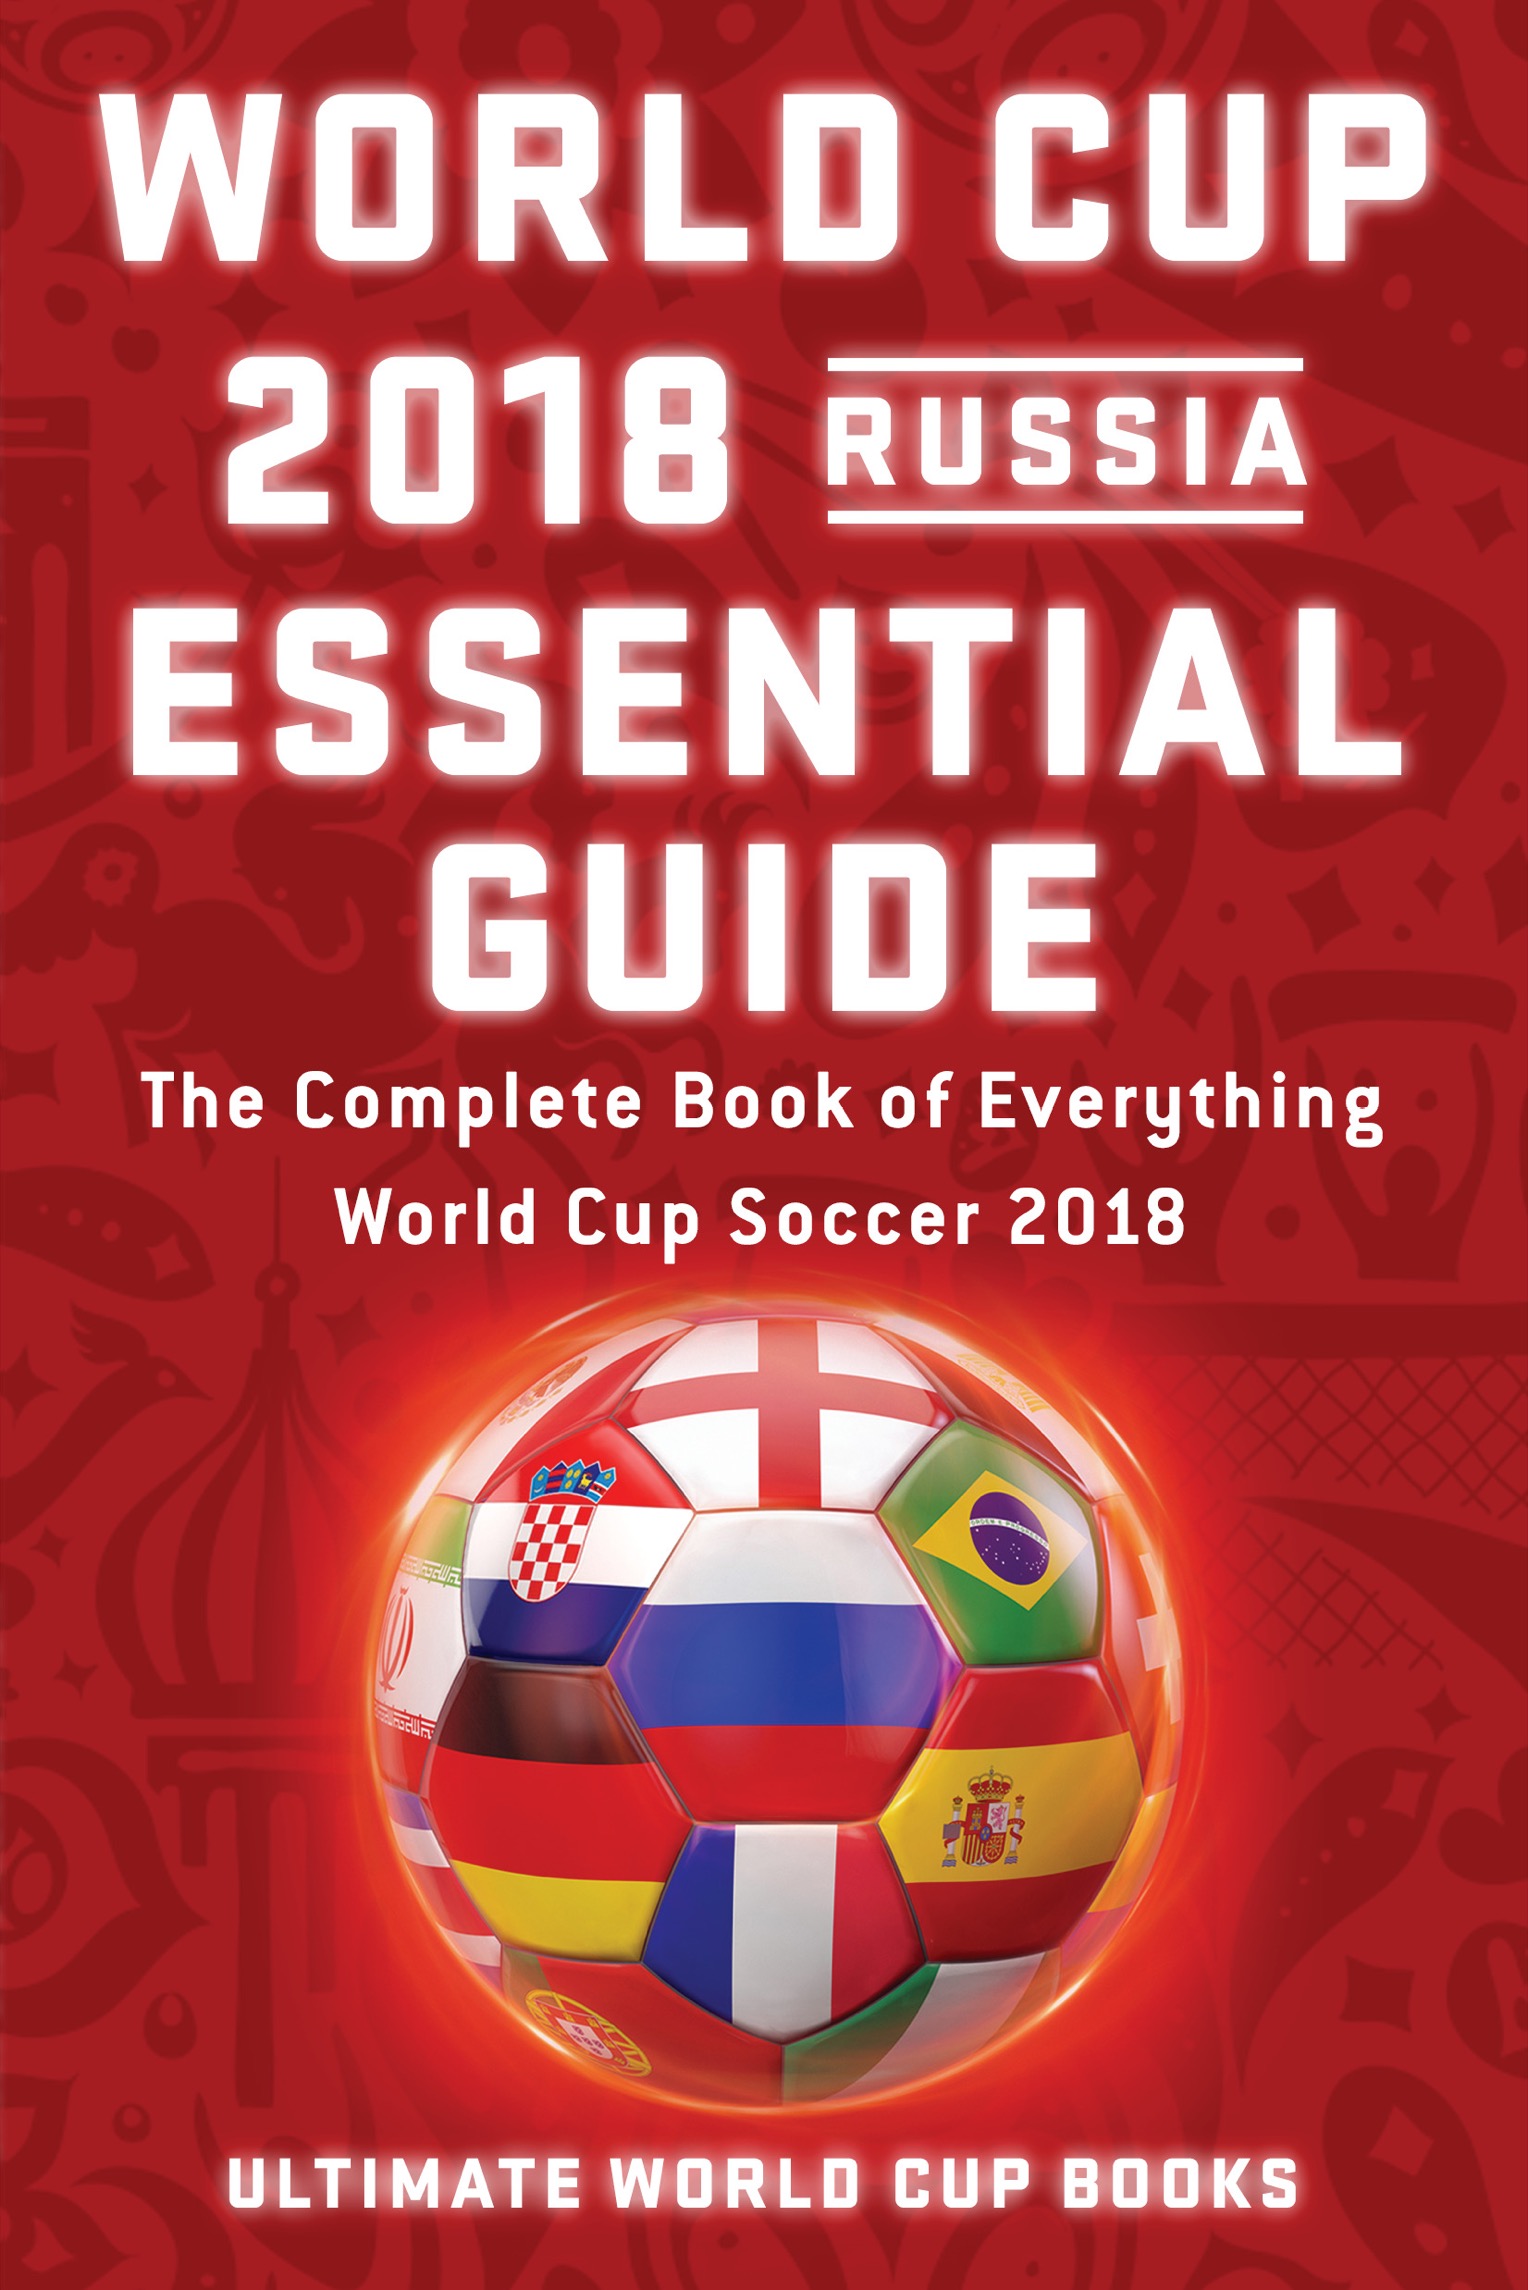 World Cup 2018 Russia Essential Guide - image 1